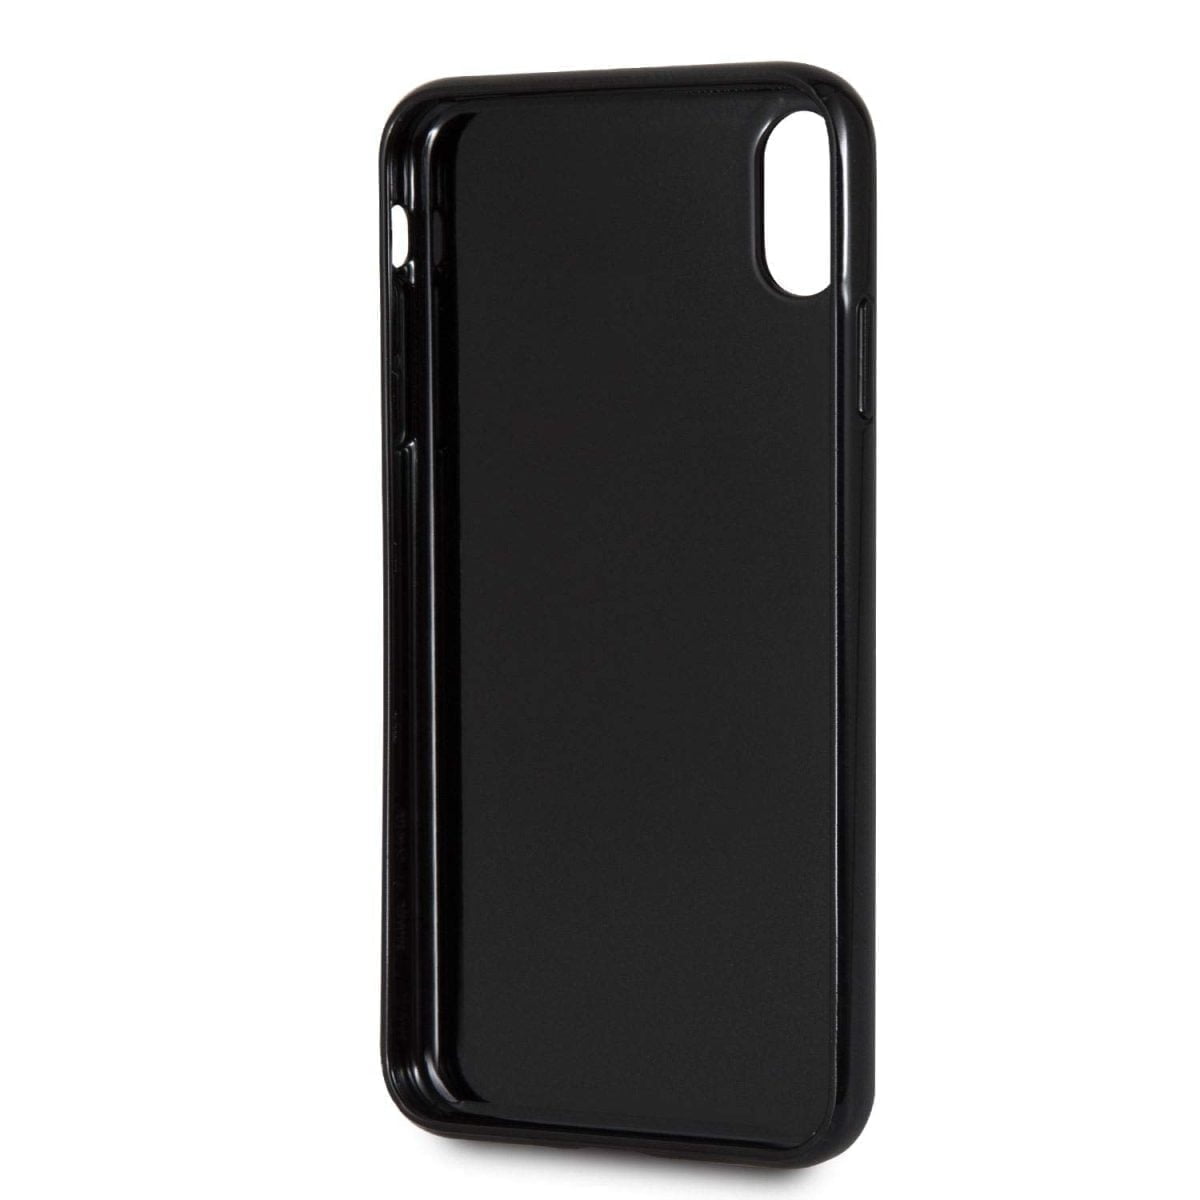 Cg Mobile Bmw Iphone Xs Max Case Black Carbon Hard Cell Phone Case Carbon Fiber Easily Accessible Ports Officially Licensed 04 غطاء آيفون ايفون Xs ماكس ألياف الكربون السوداء (Bmw)